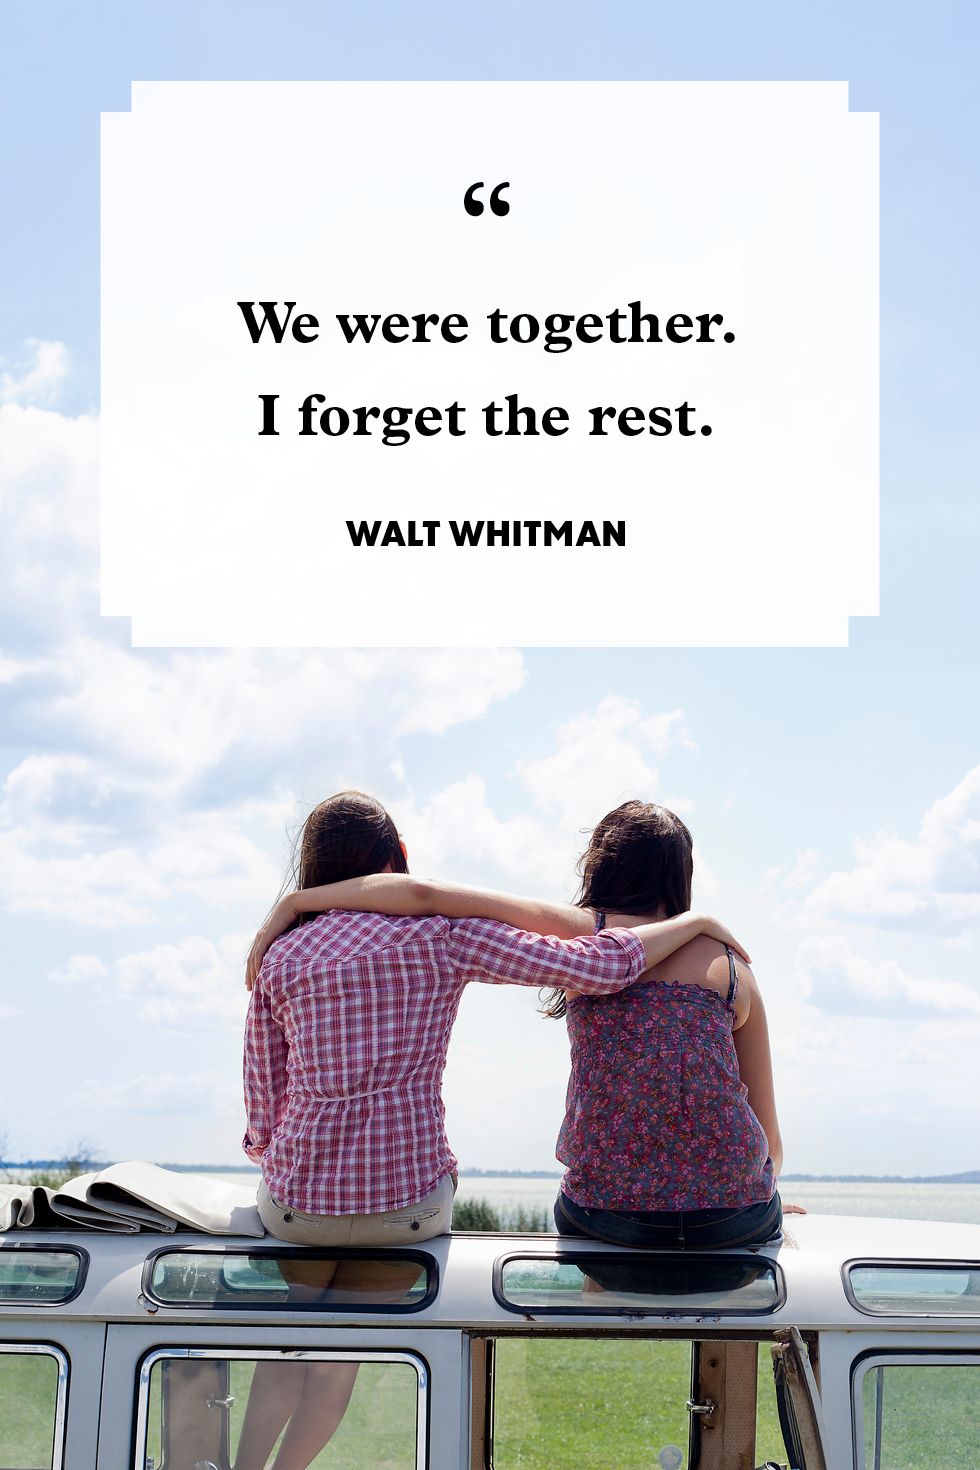 15 Cute Friendship Quotes to Share With Your Best Friend